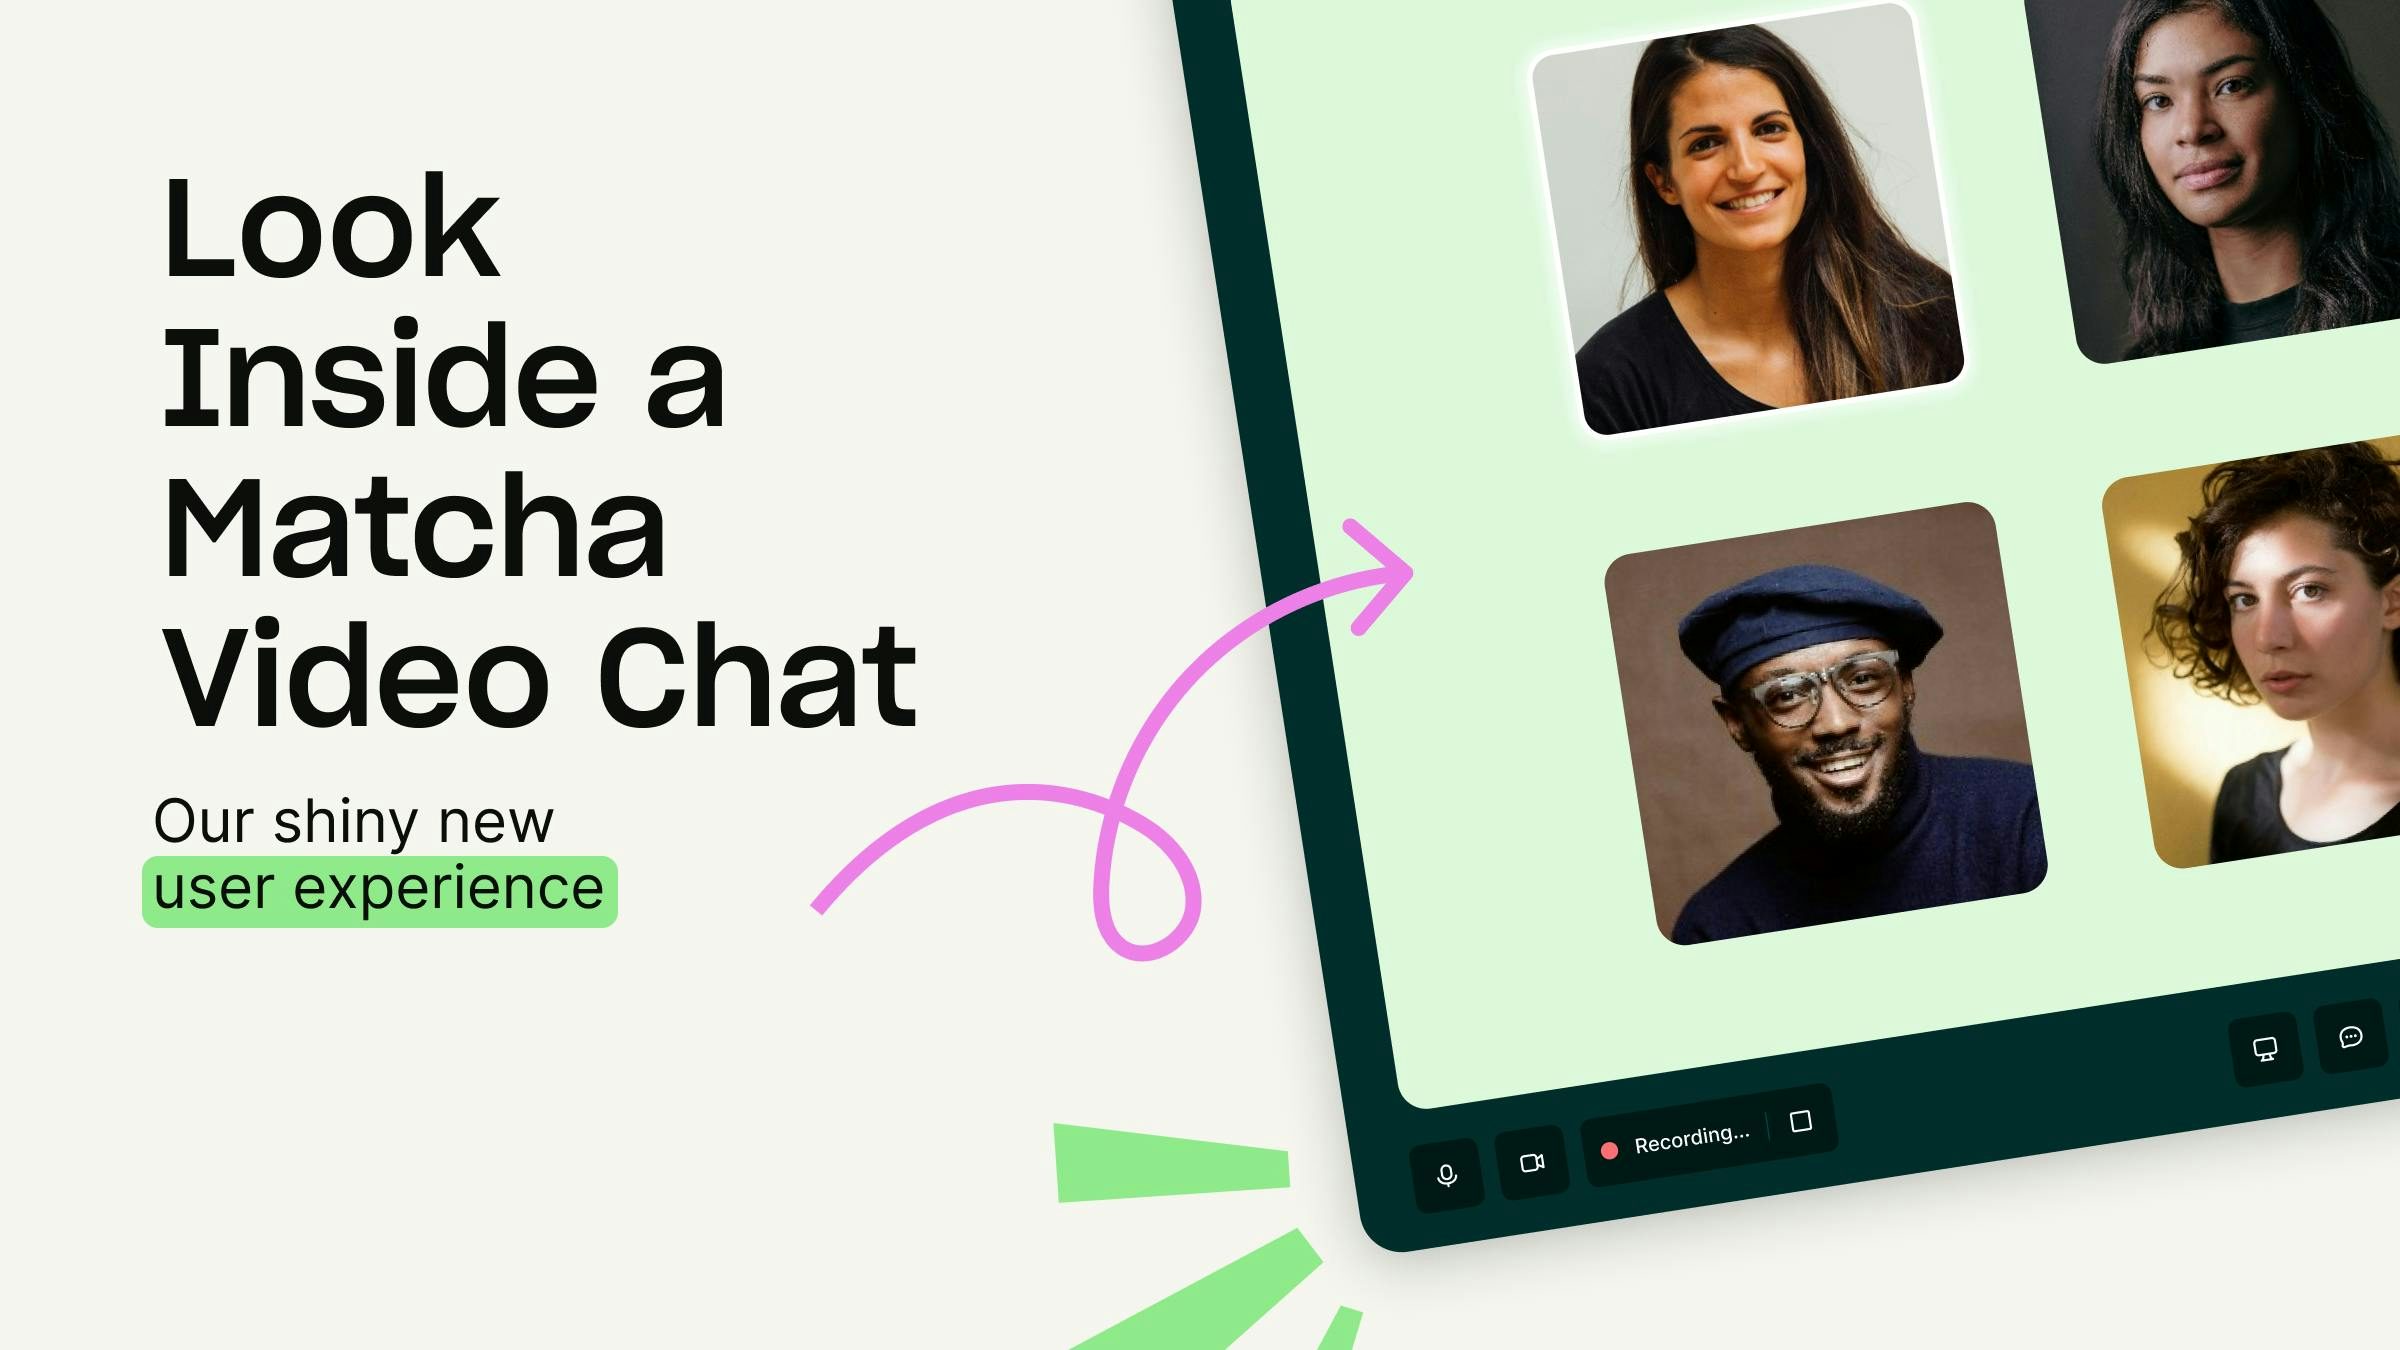 Look inside a matcha video chat : our shiny new user experience